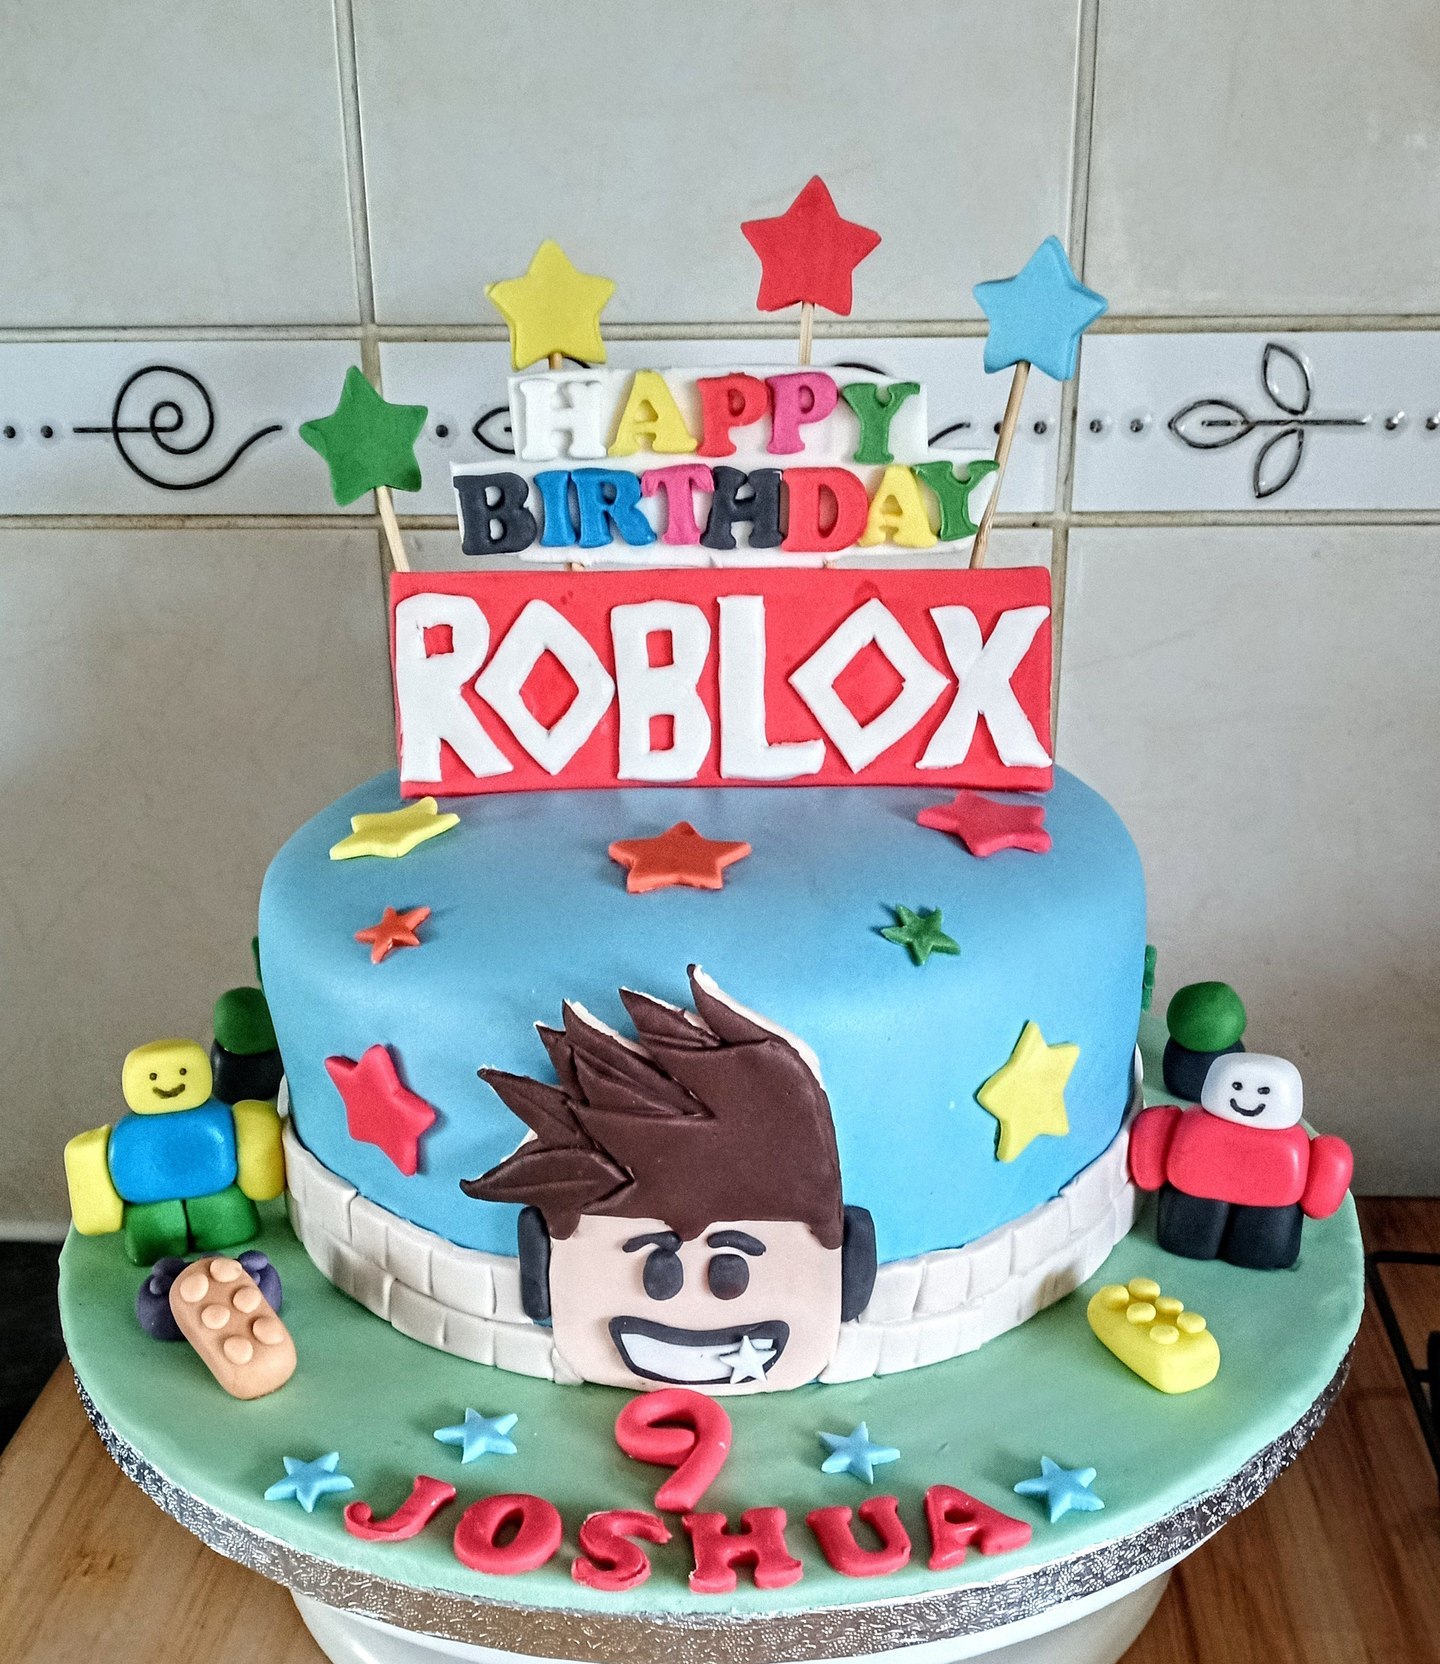 A "Roblox computer game" inspired cake